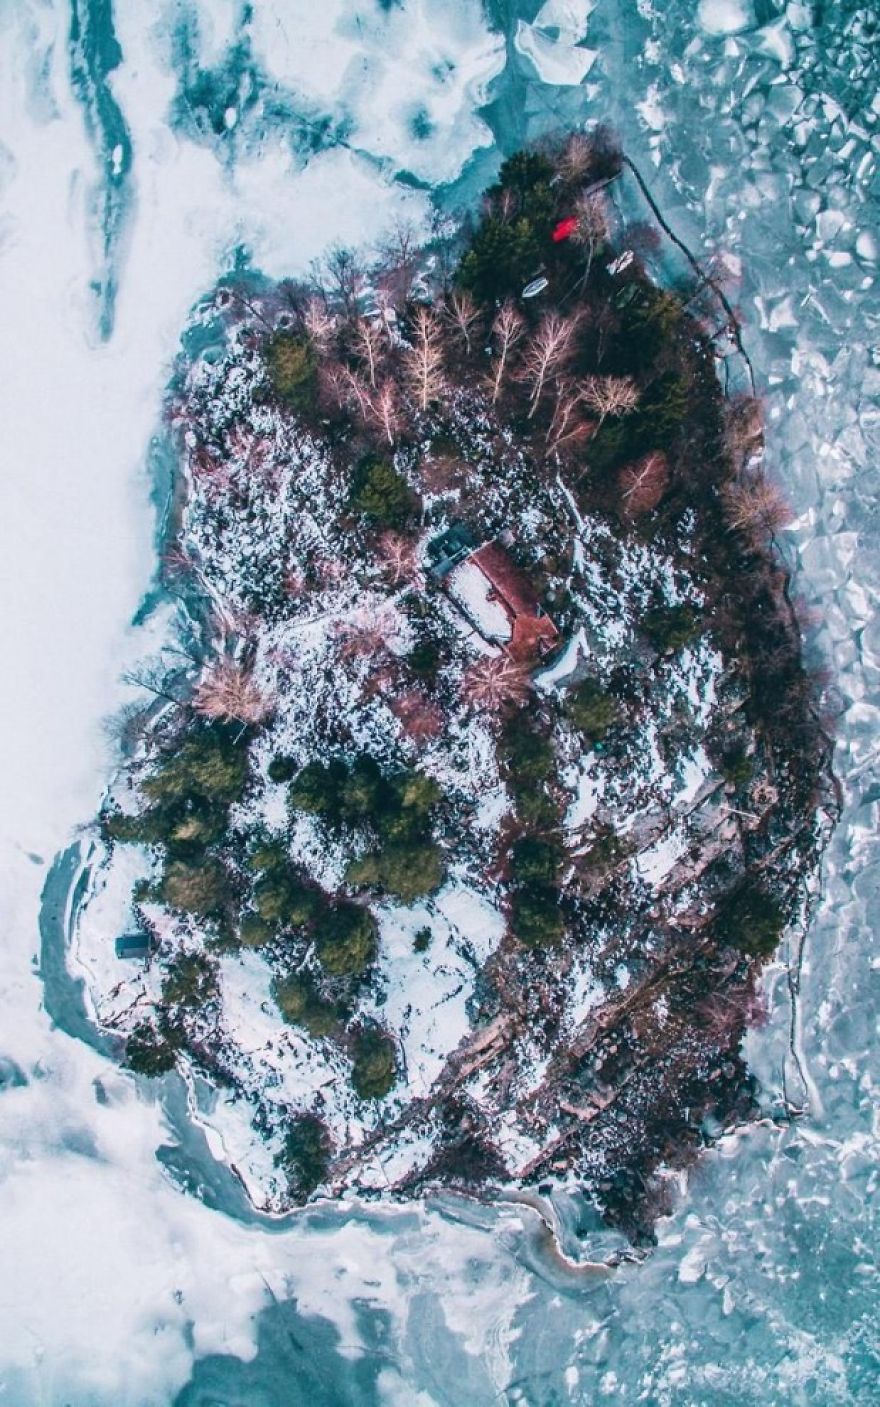 Changing Of Seasons In Sweden With A Bird’s-Eye View